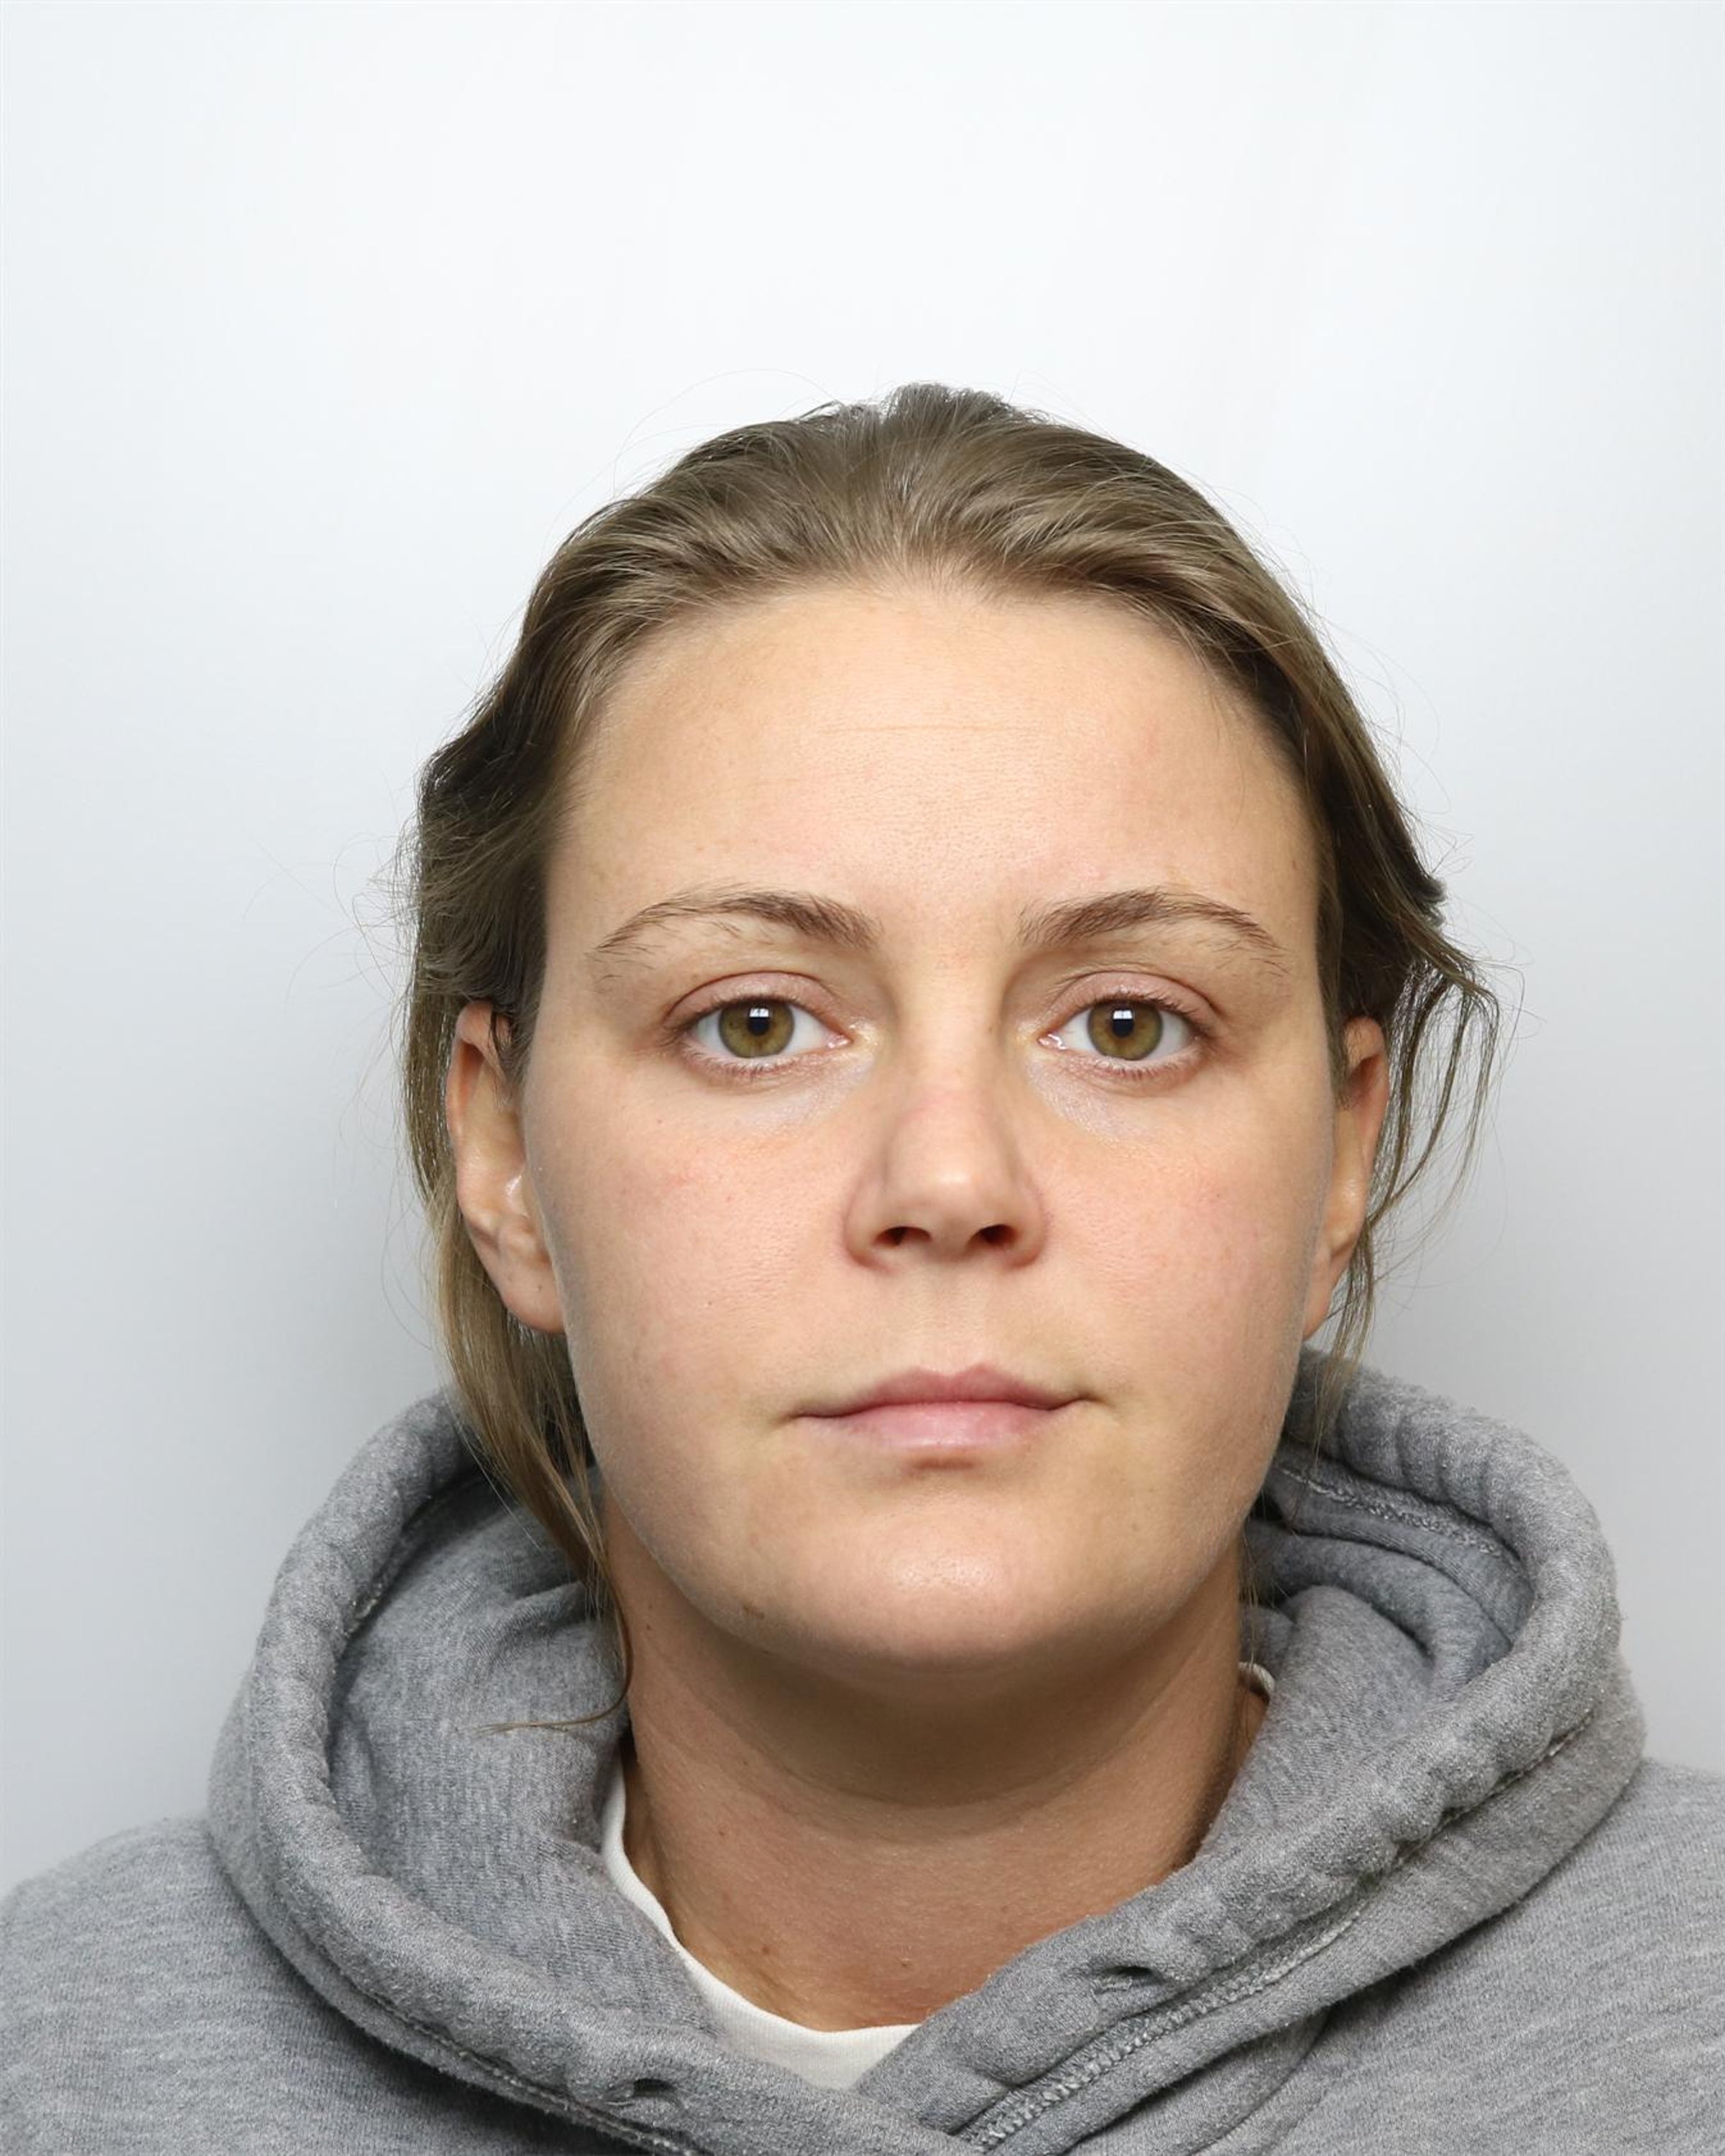 Savannah Brockhill was found guilty at Bradford Crown Court of murdering 16-month-old Star Hobson (West Yorkshire Police/PA)